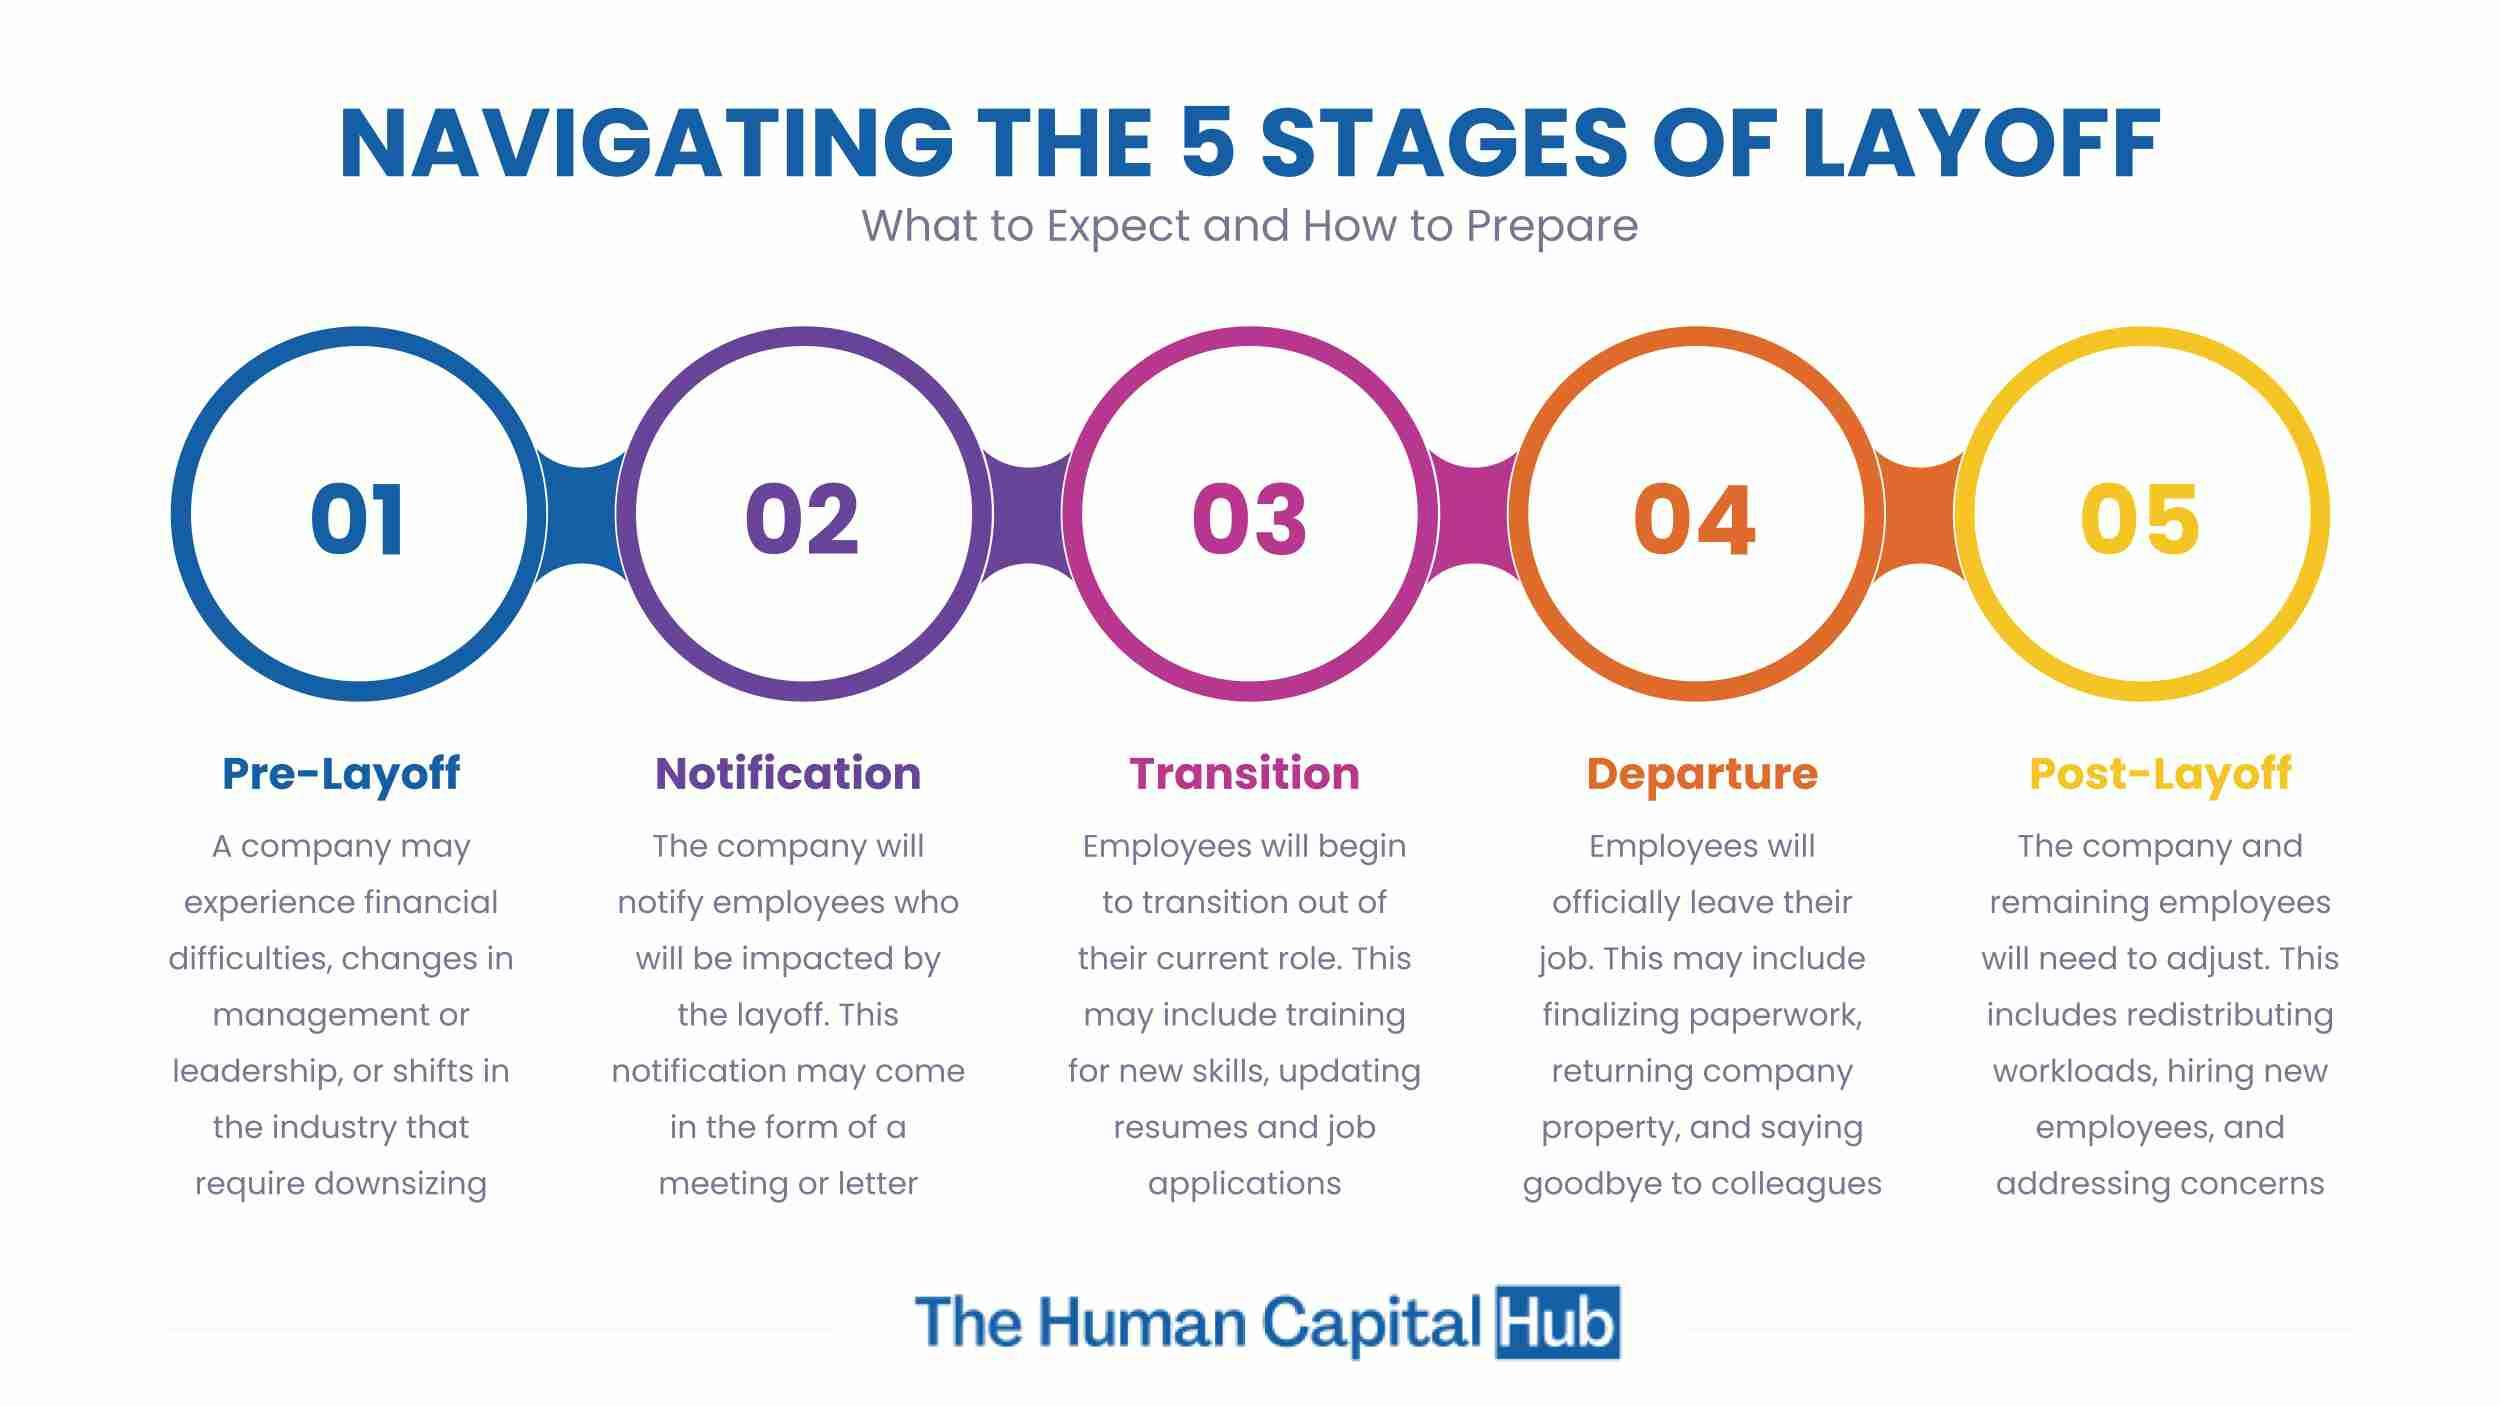 5 Stages of Layoff